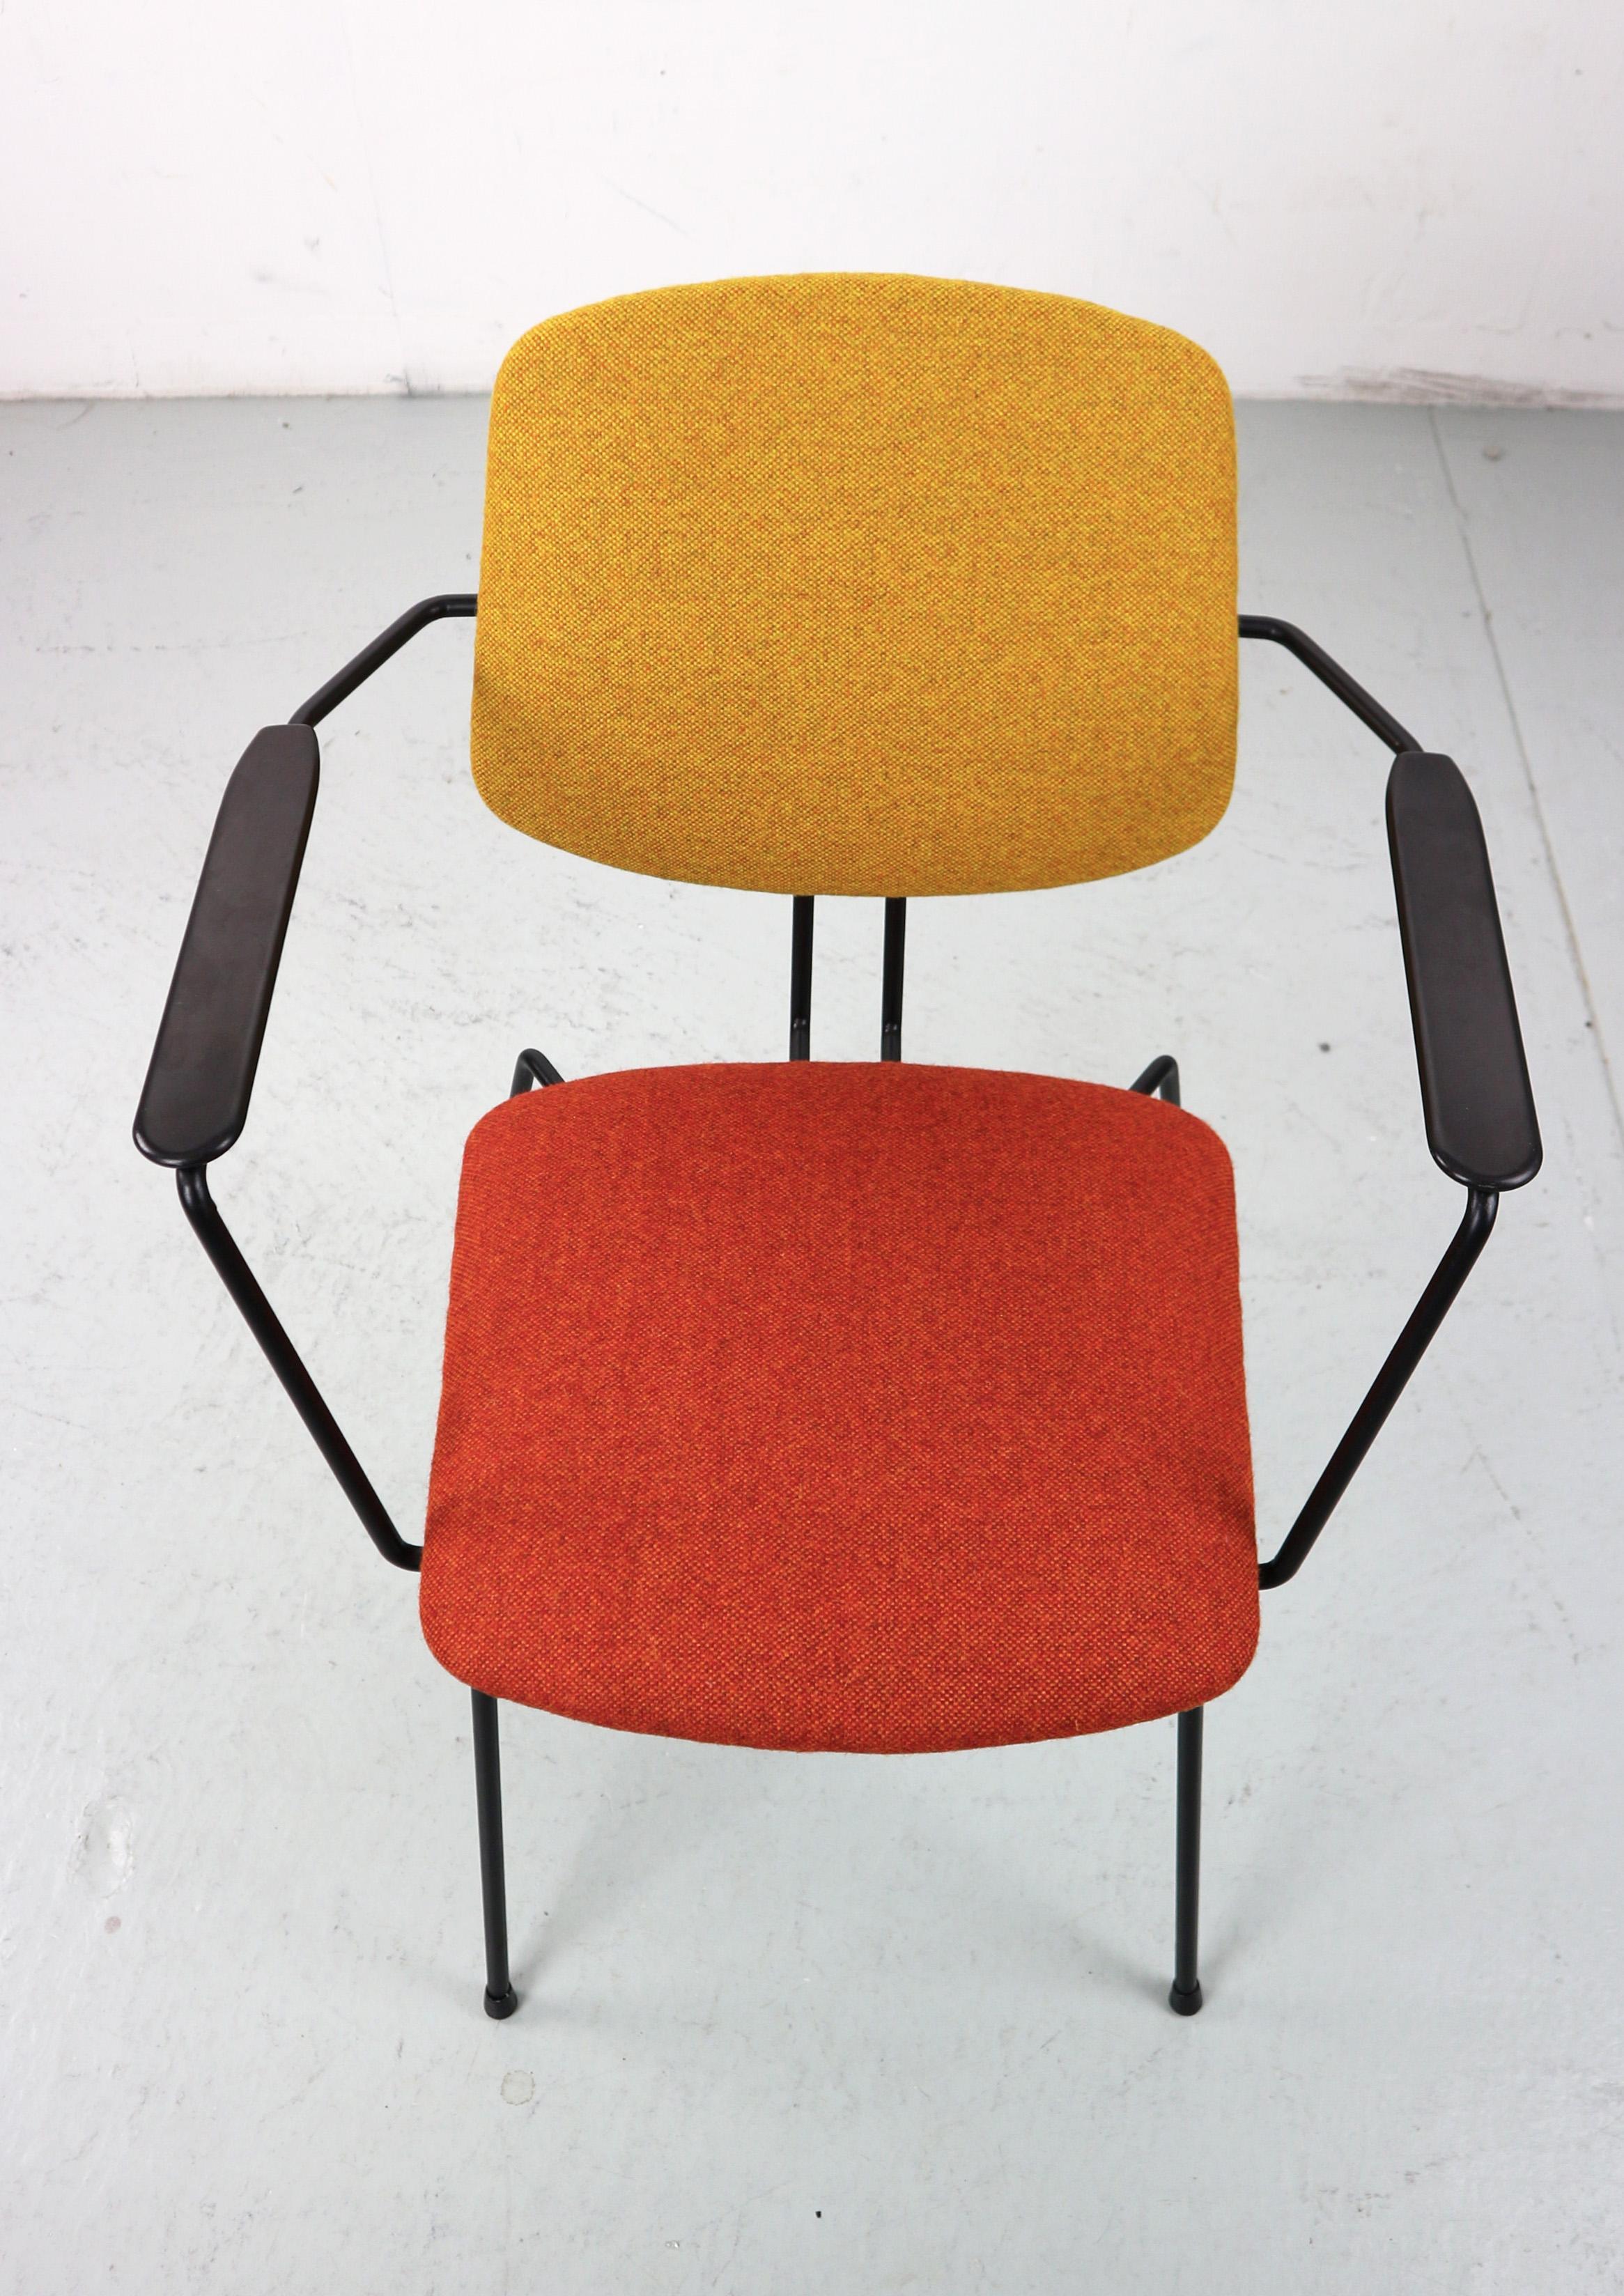 Steel Model 5003, Rudolf Wolf, 1950. set of armchairs For Sale